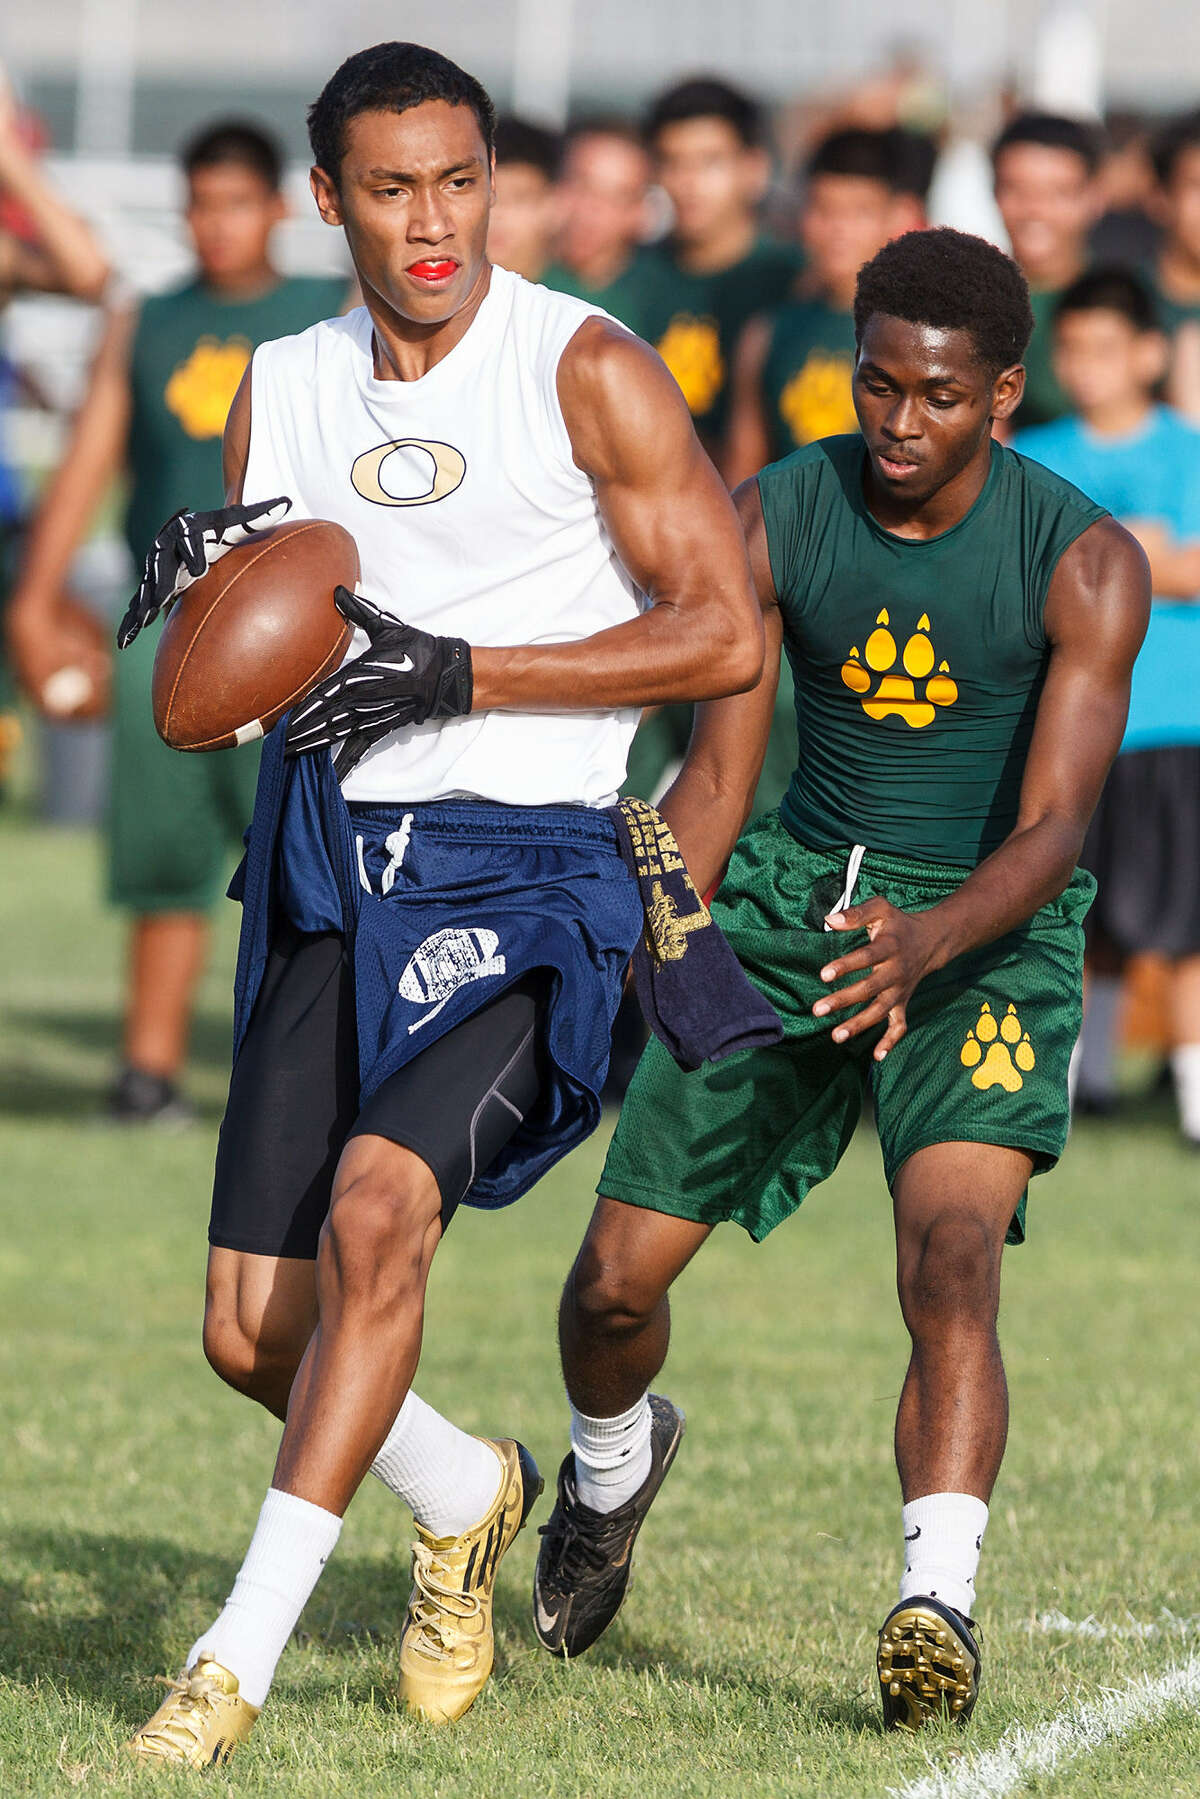 O'Connor wide receiver Nate Phillips (left) catches a pass against Holmes June 20 during 7-on-7 competition at the NISD soccer fields.